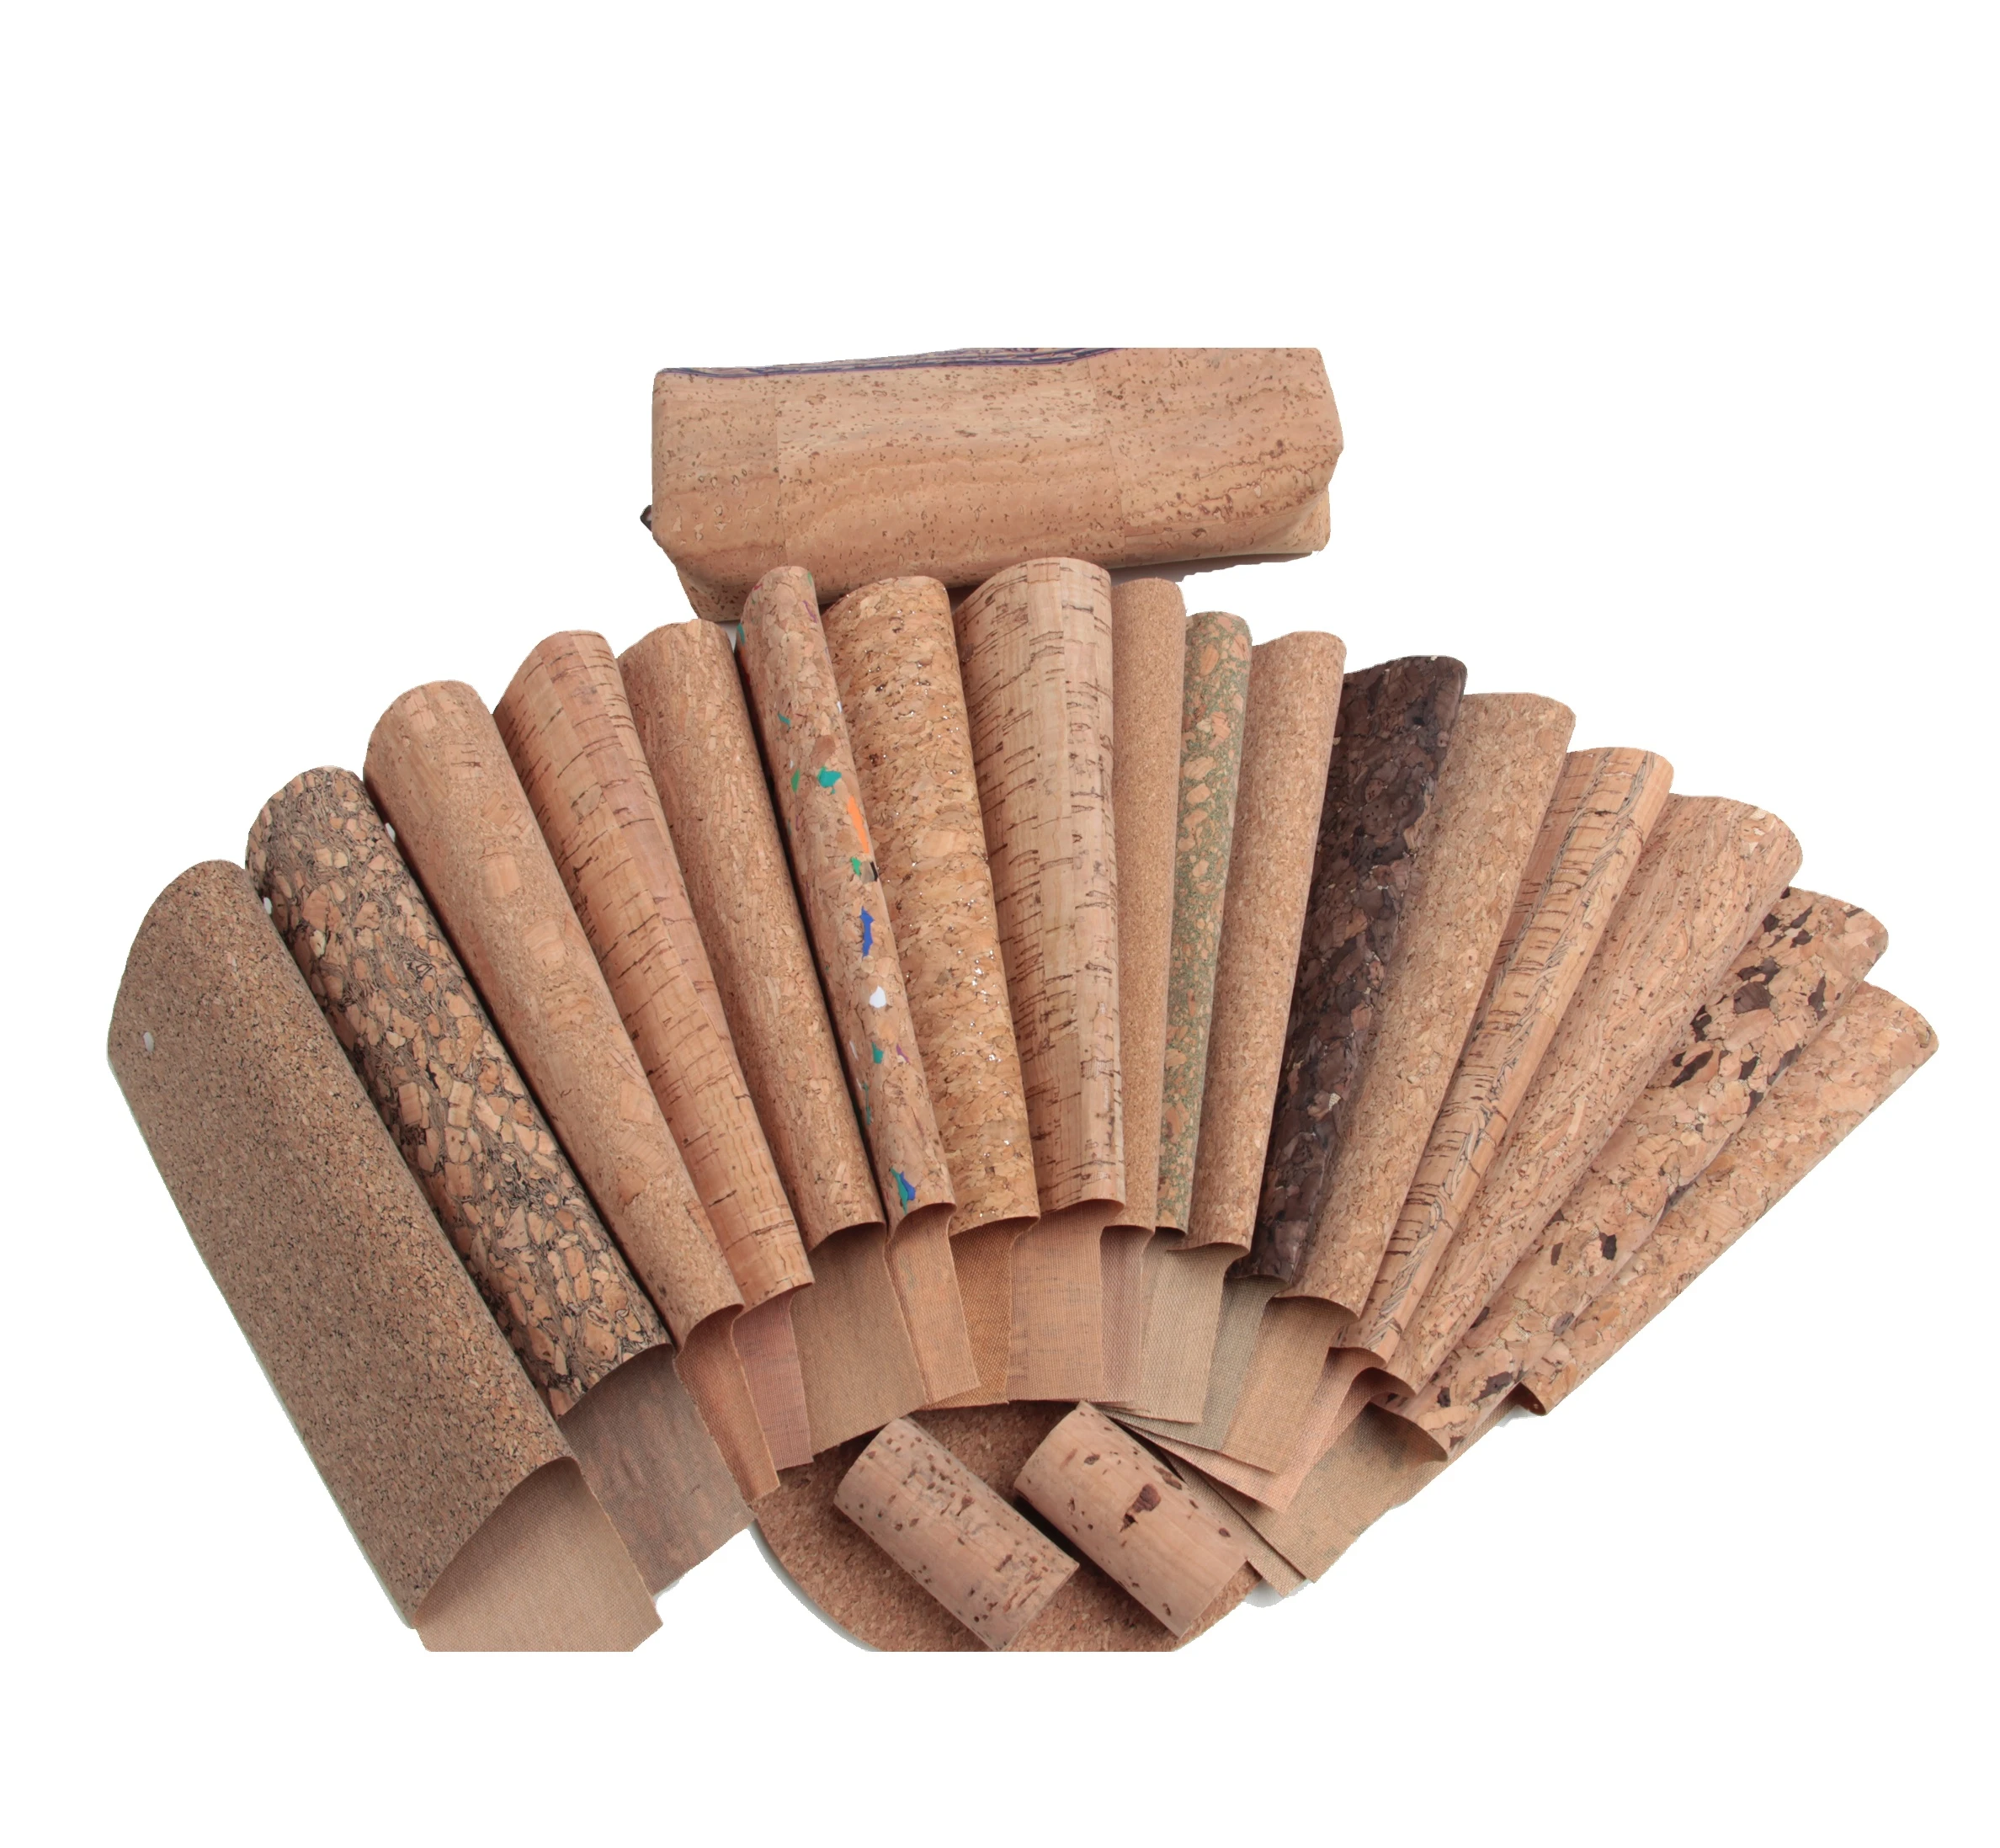 Portugal cork material cork leather natural quare cork fabric for packaging shoes bags yoga mats